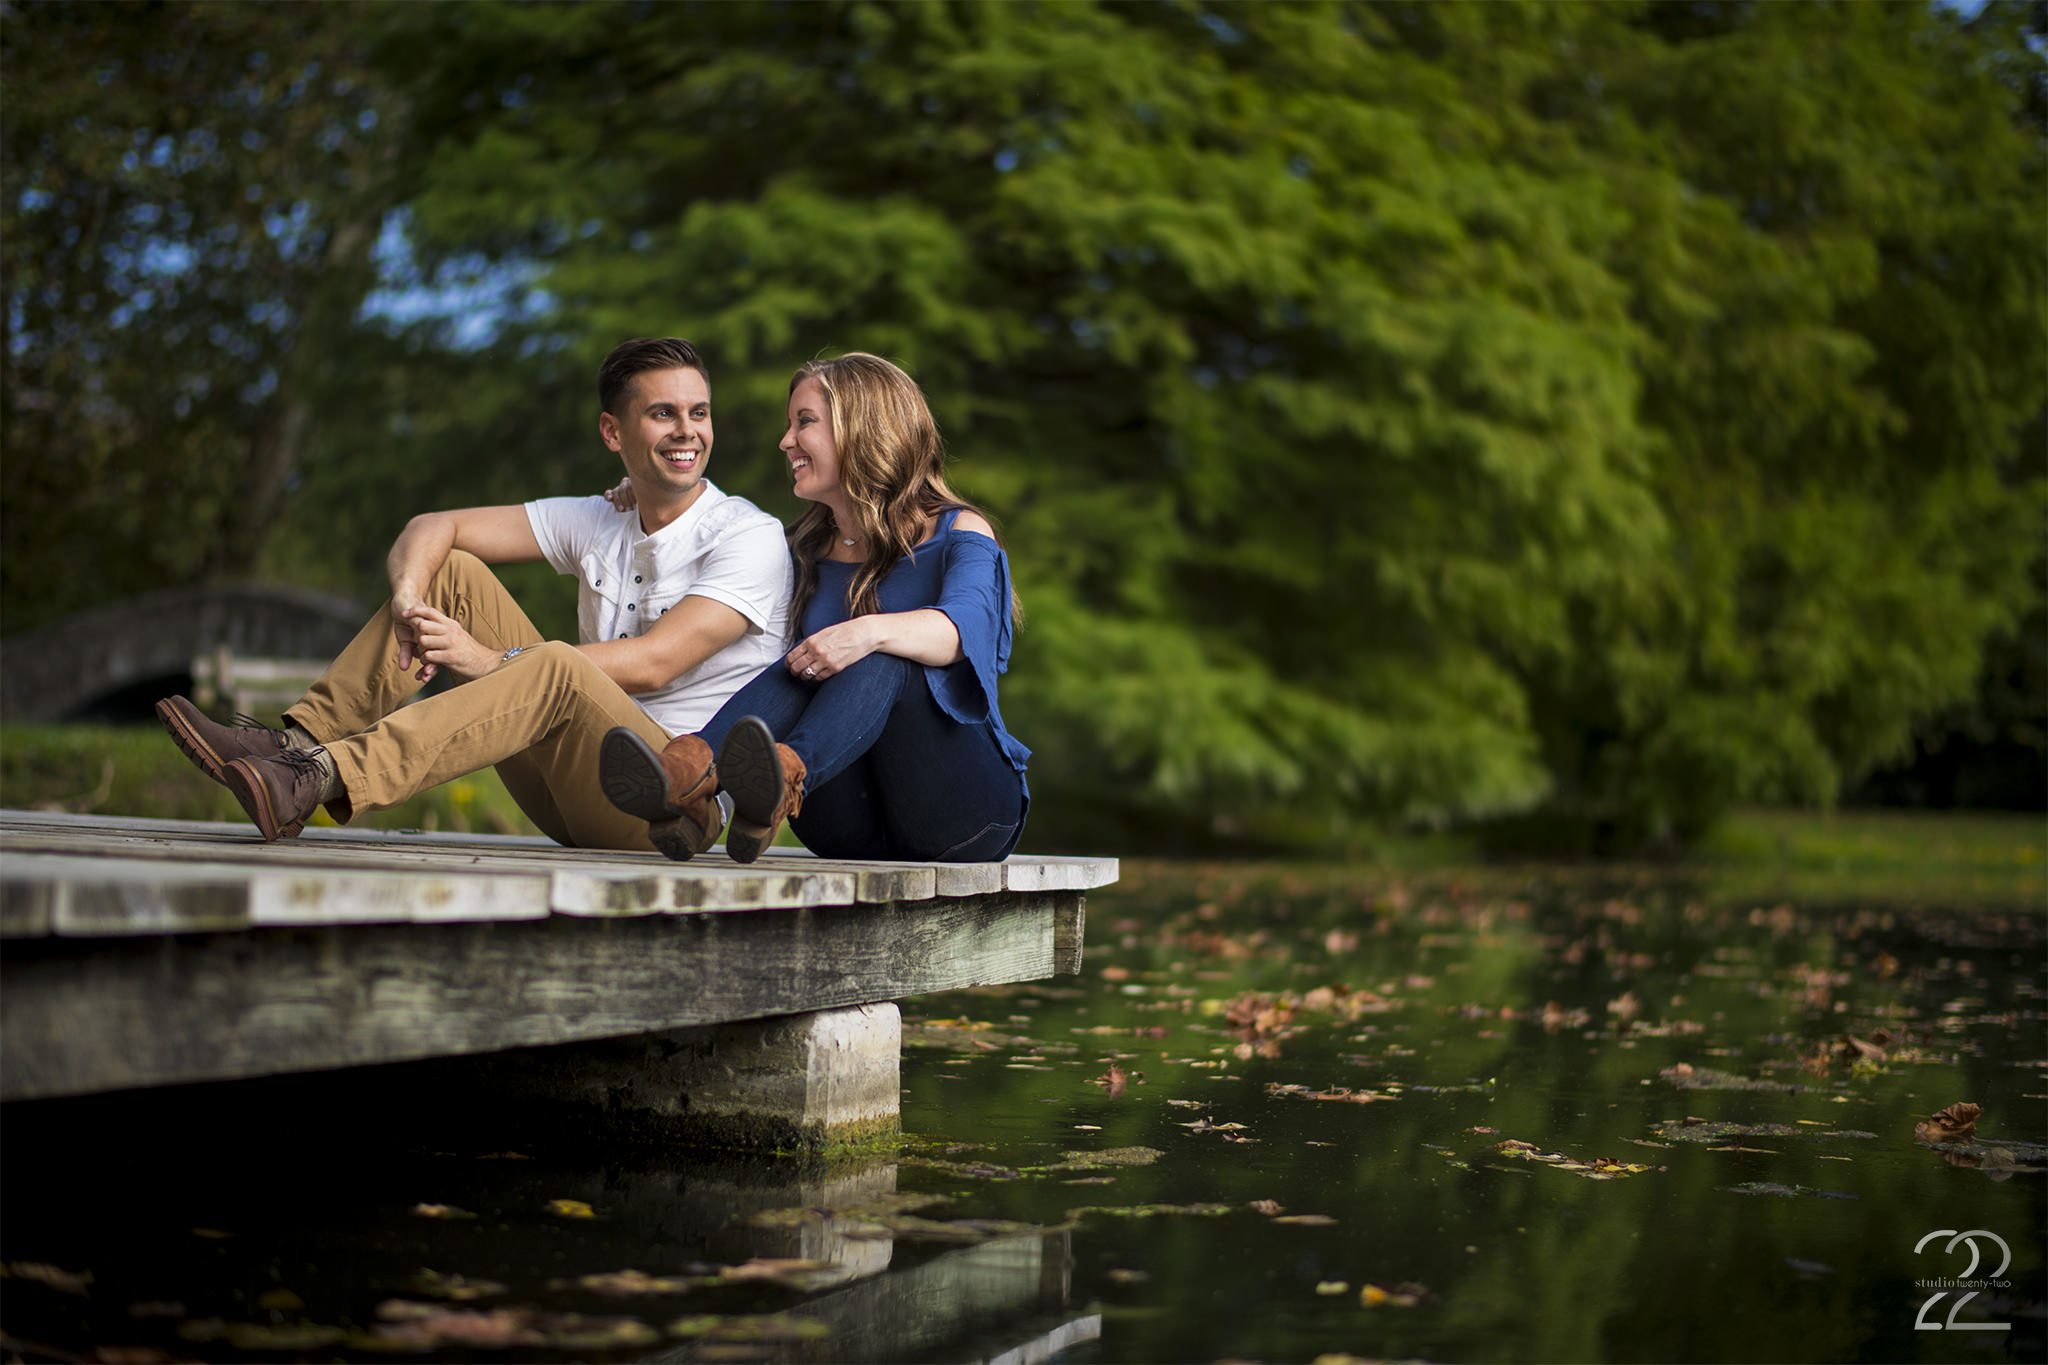  Eastwood Metro Park is one of my favorite places for Dayton engagement photo sessions. Above you